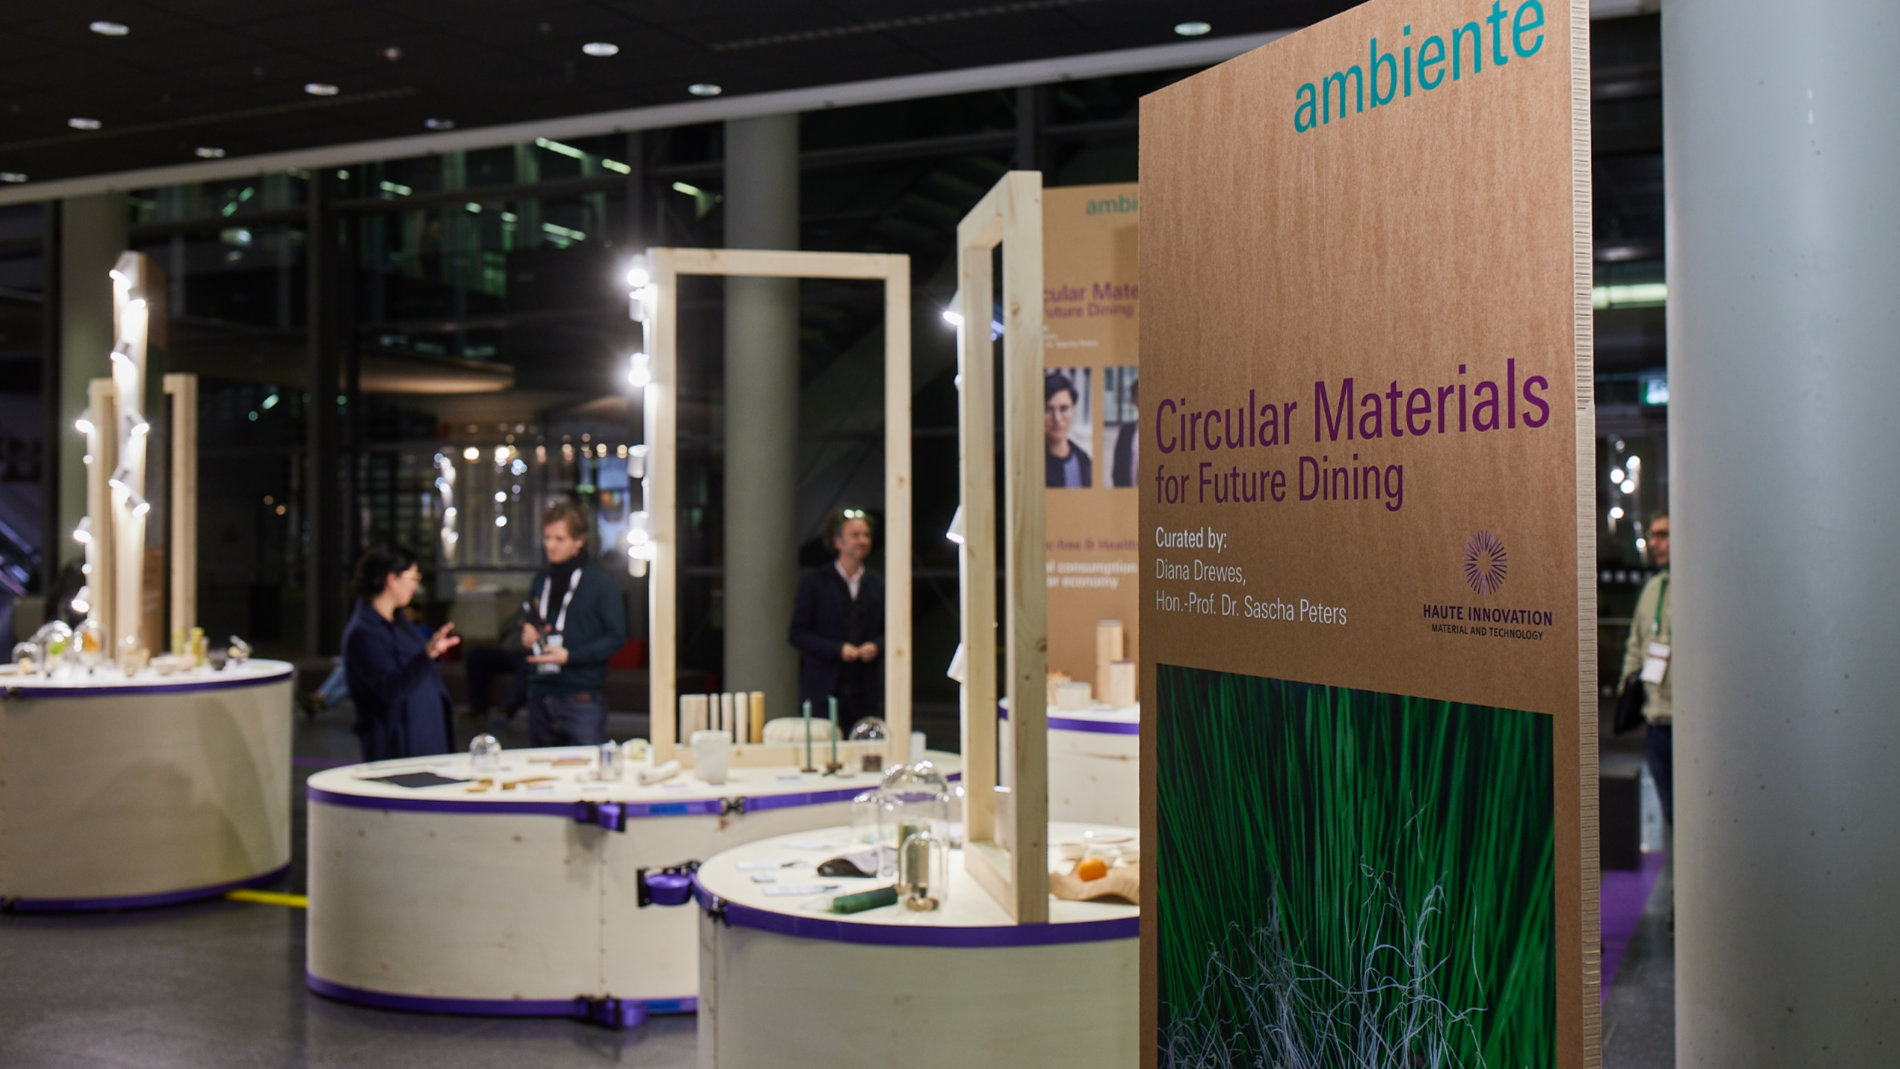 Circular Materials for Future Dining area at Ambiente